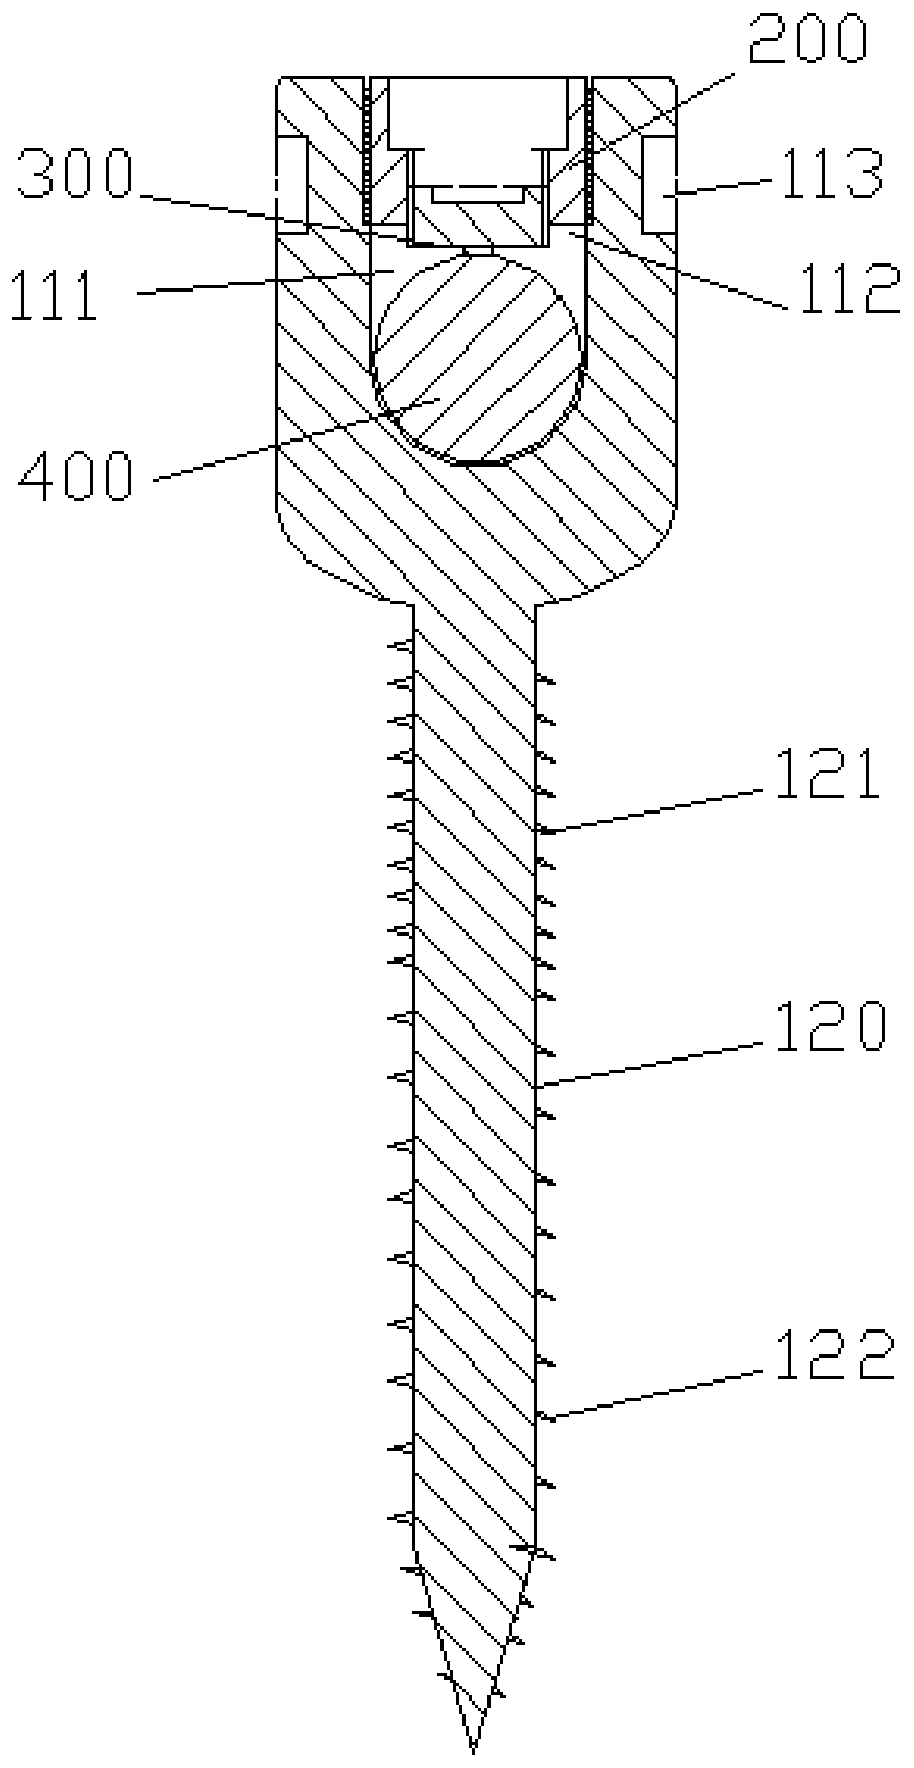 Pedicle screw fixation device and system for thoracolumbar spine posterior orthopedics